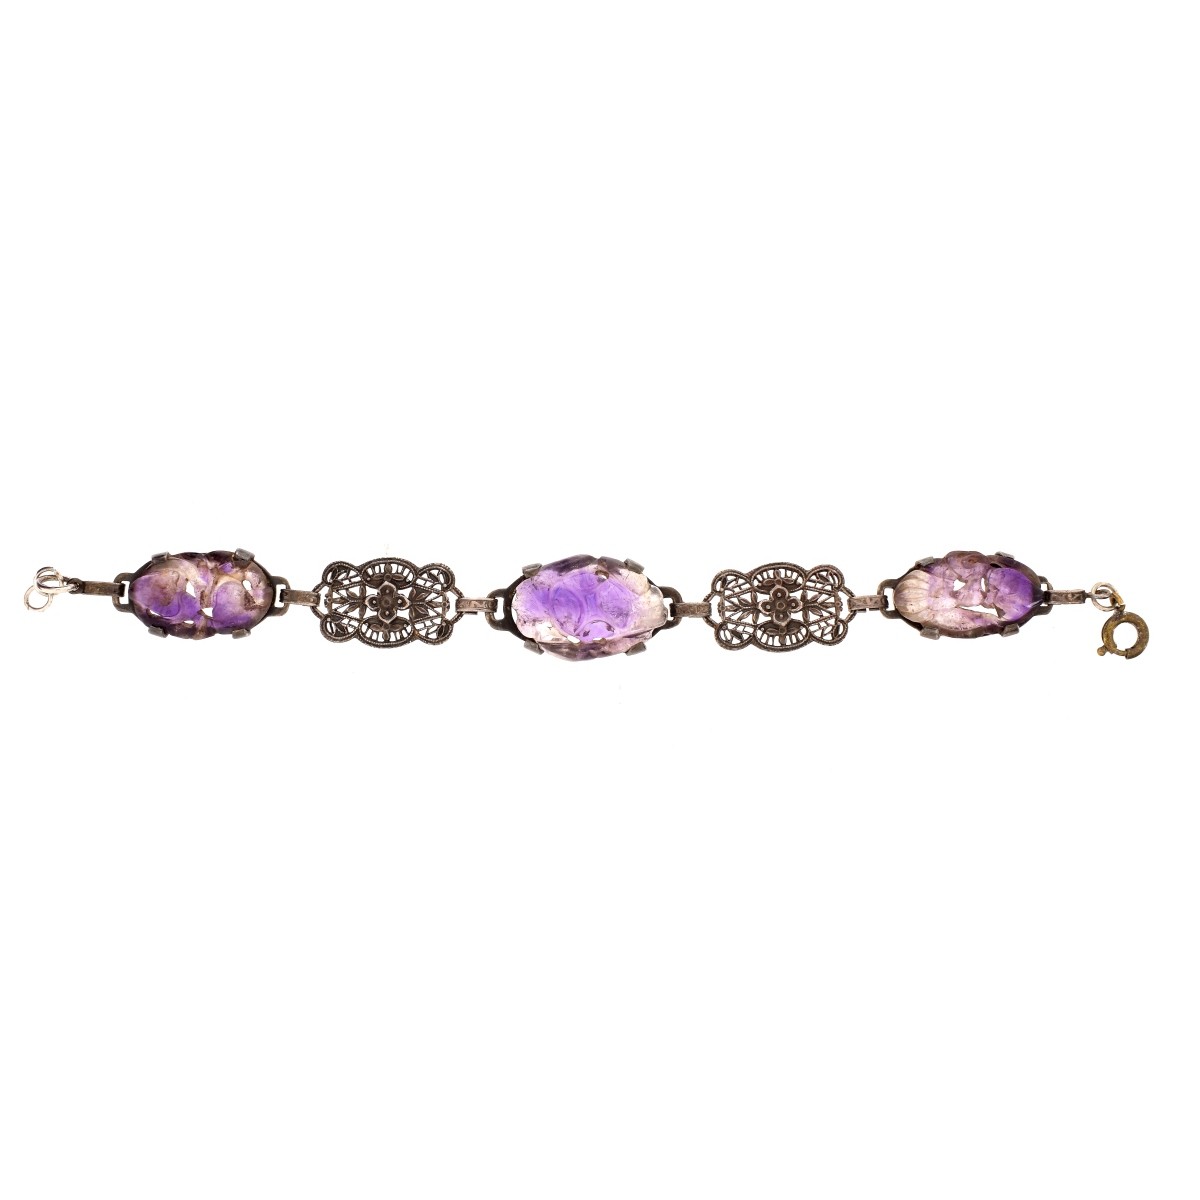 Antique Amethyst and Sterling Jewelry Suite